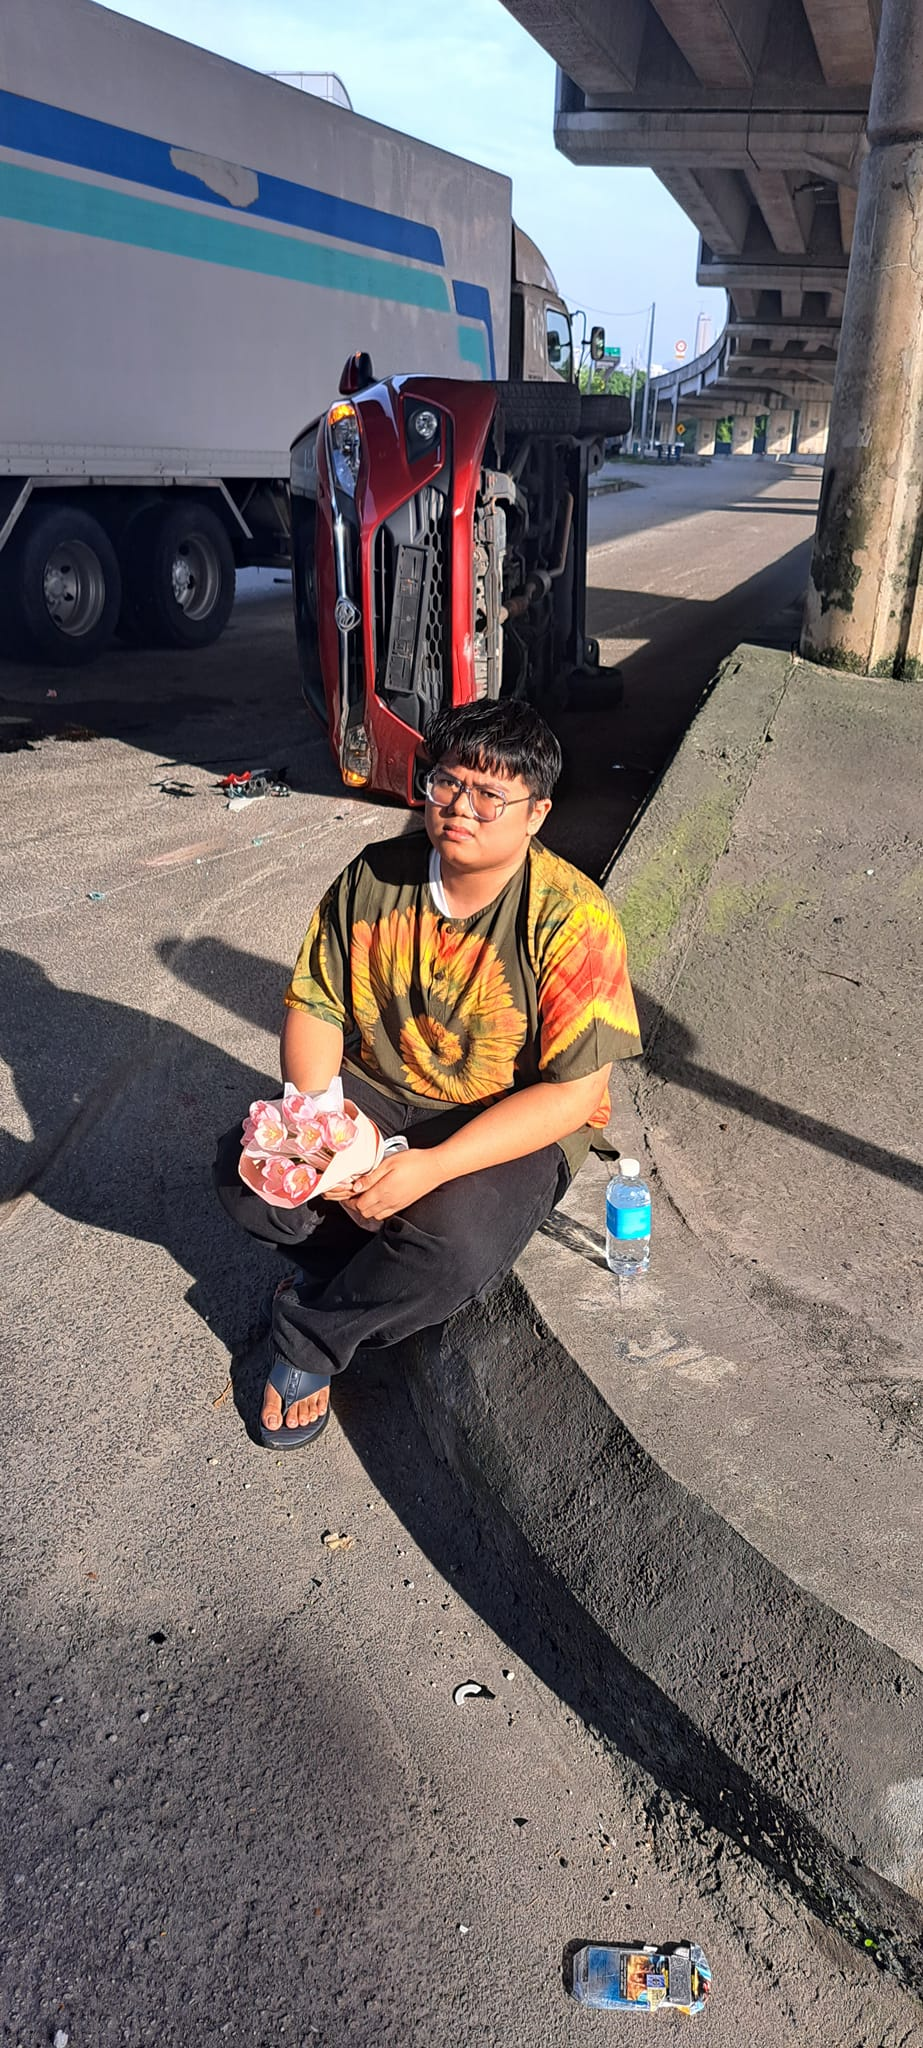 M'sian teen holds on to flowers he bought for mum's birthday despite getting into an accident, touches netizens